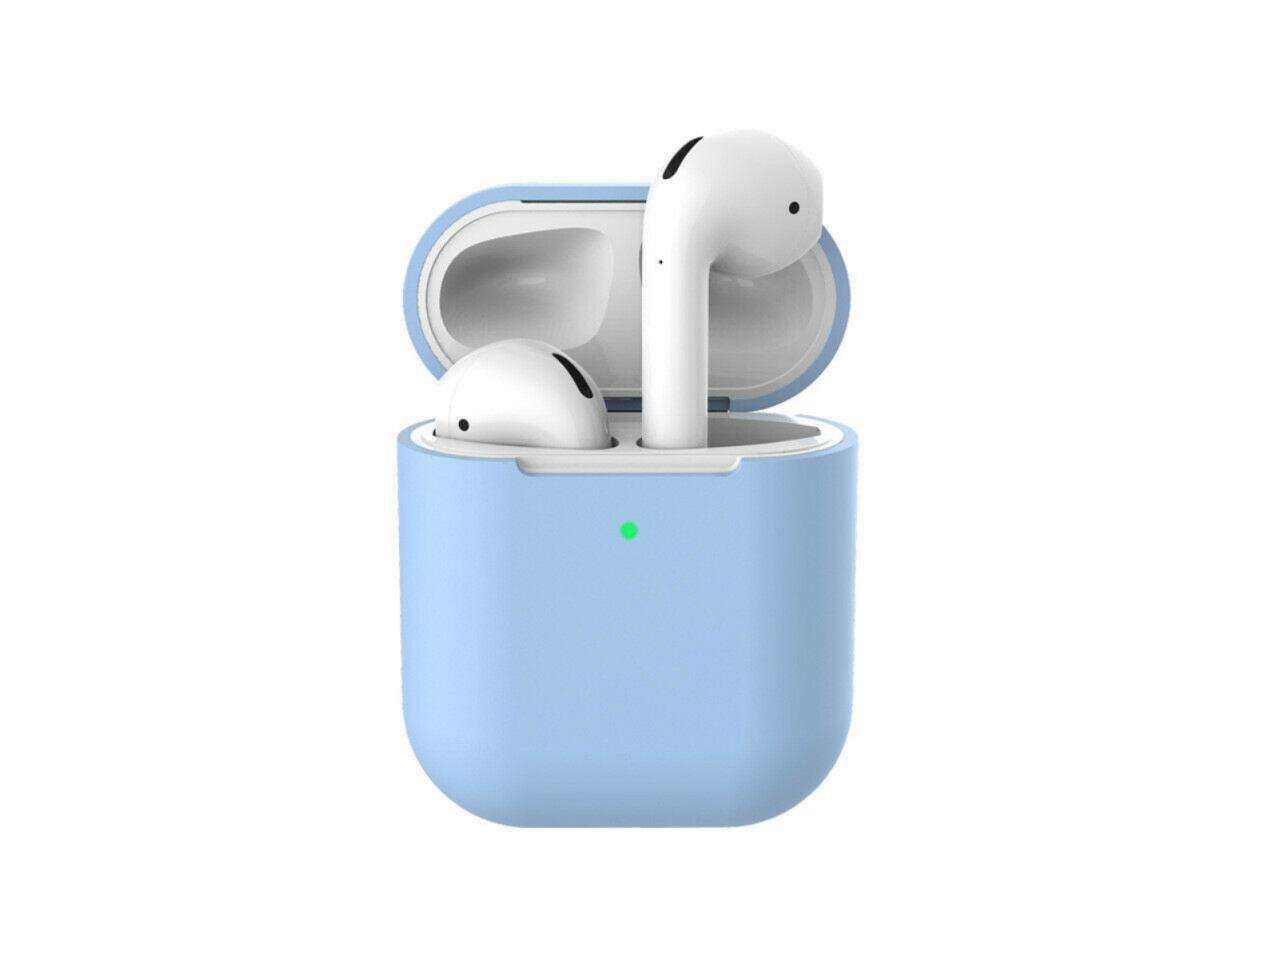 Silicone Headset/Earpiece Case Protective Cover For AirPods 2nd Generation Earphone (Only Cover, Not included earphone)